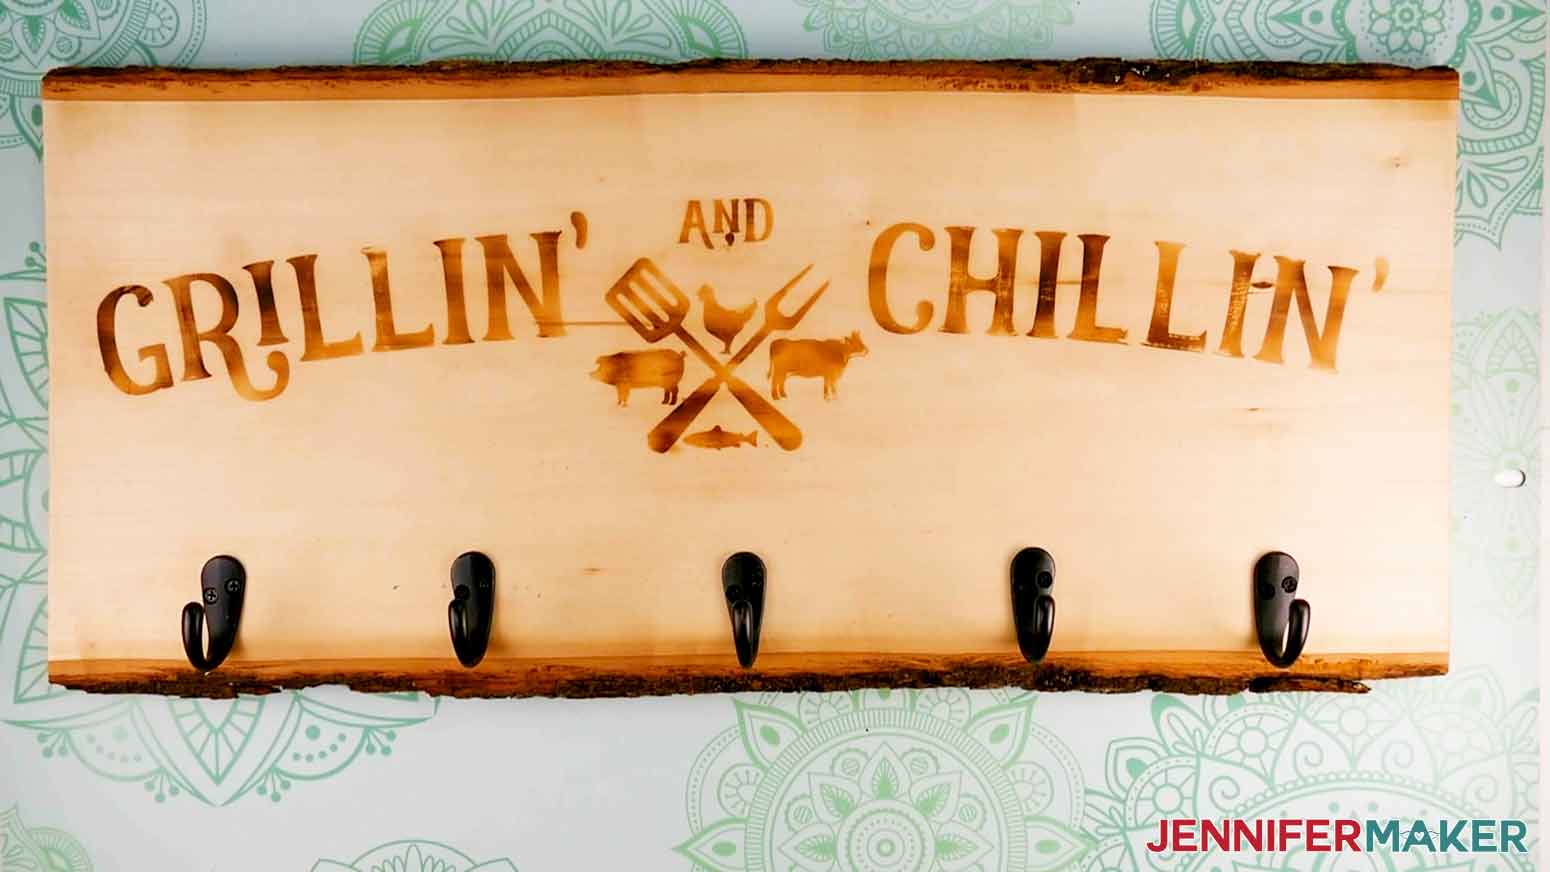 Grillin’ and chillin’ wood burned design sign